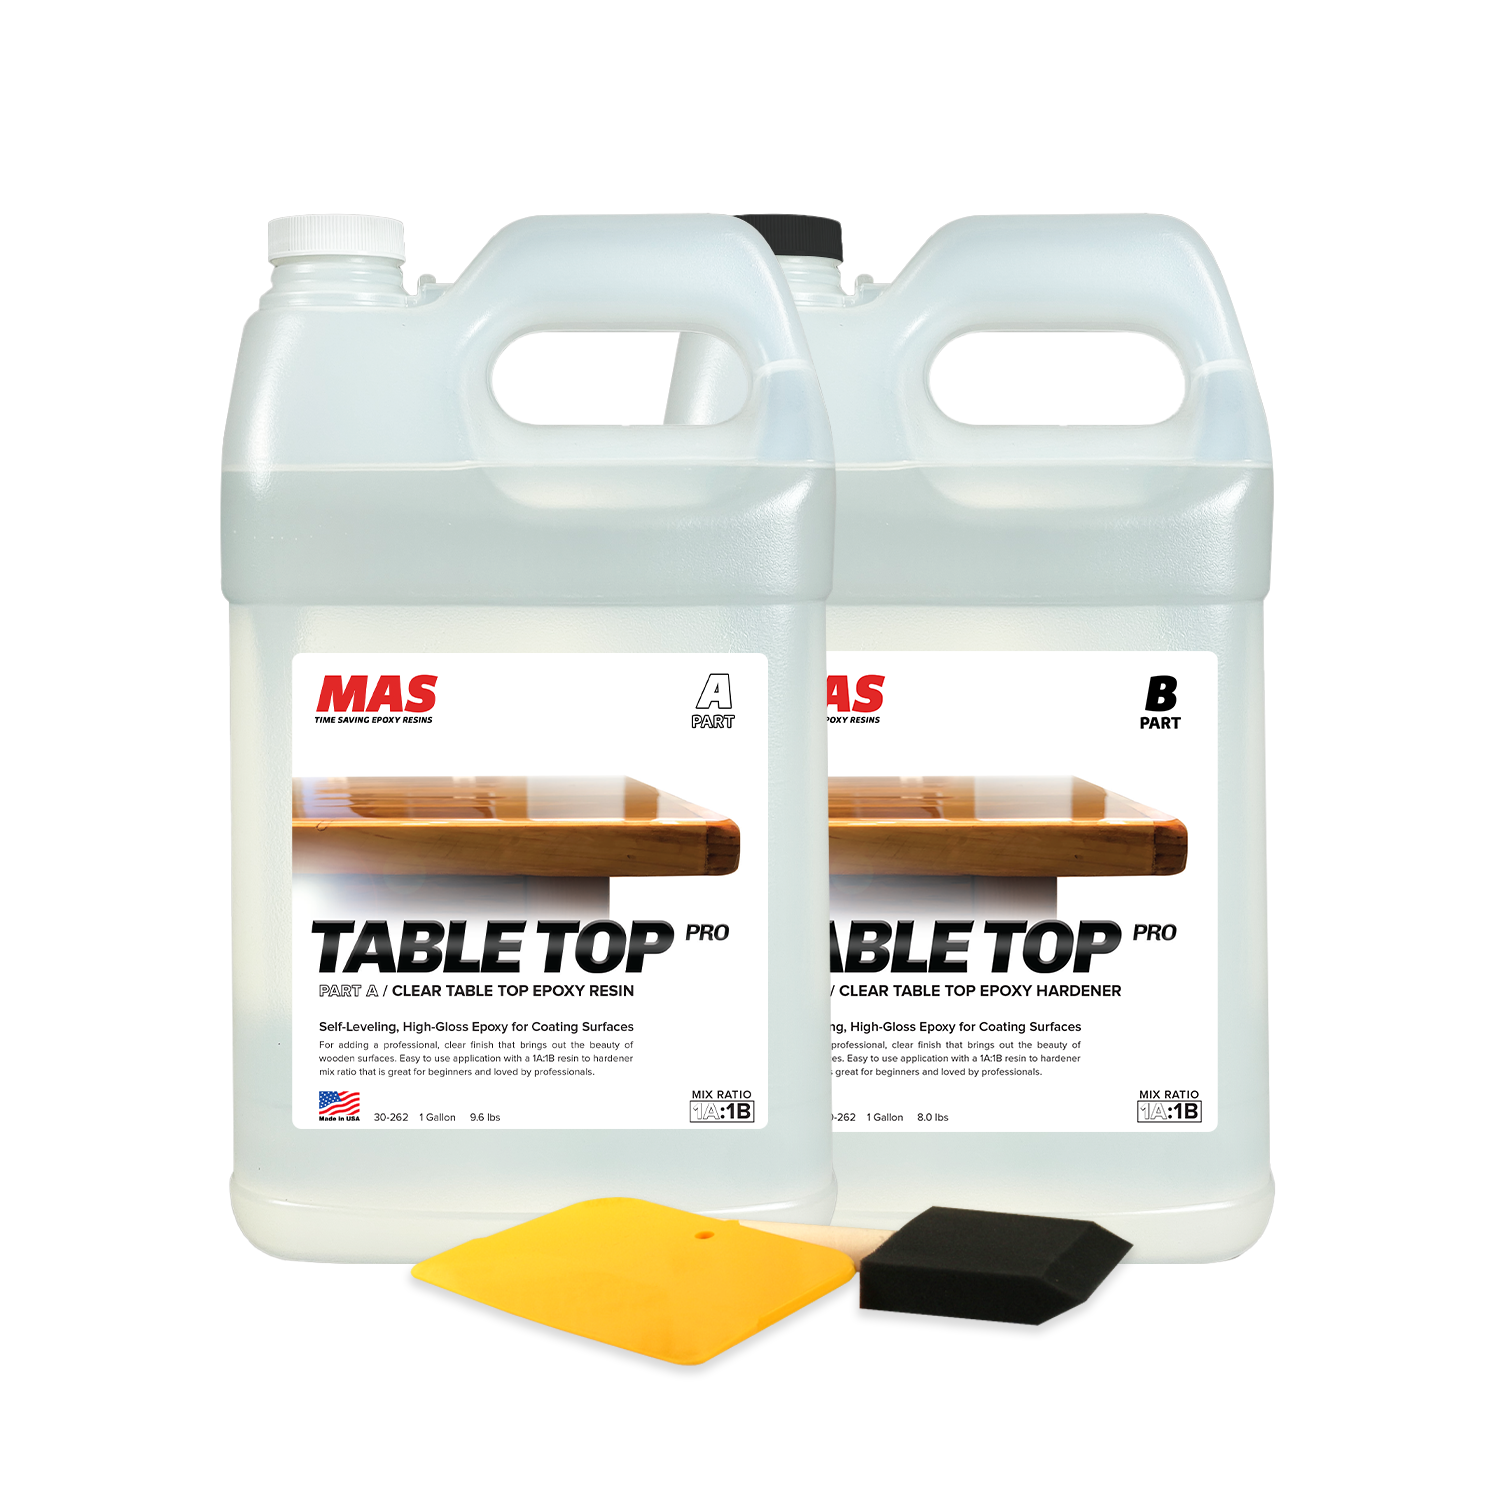 Is Mas table top pro fda compliant for use on plates or surfaces food May touch?